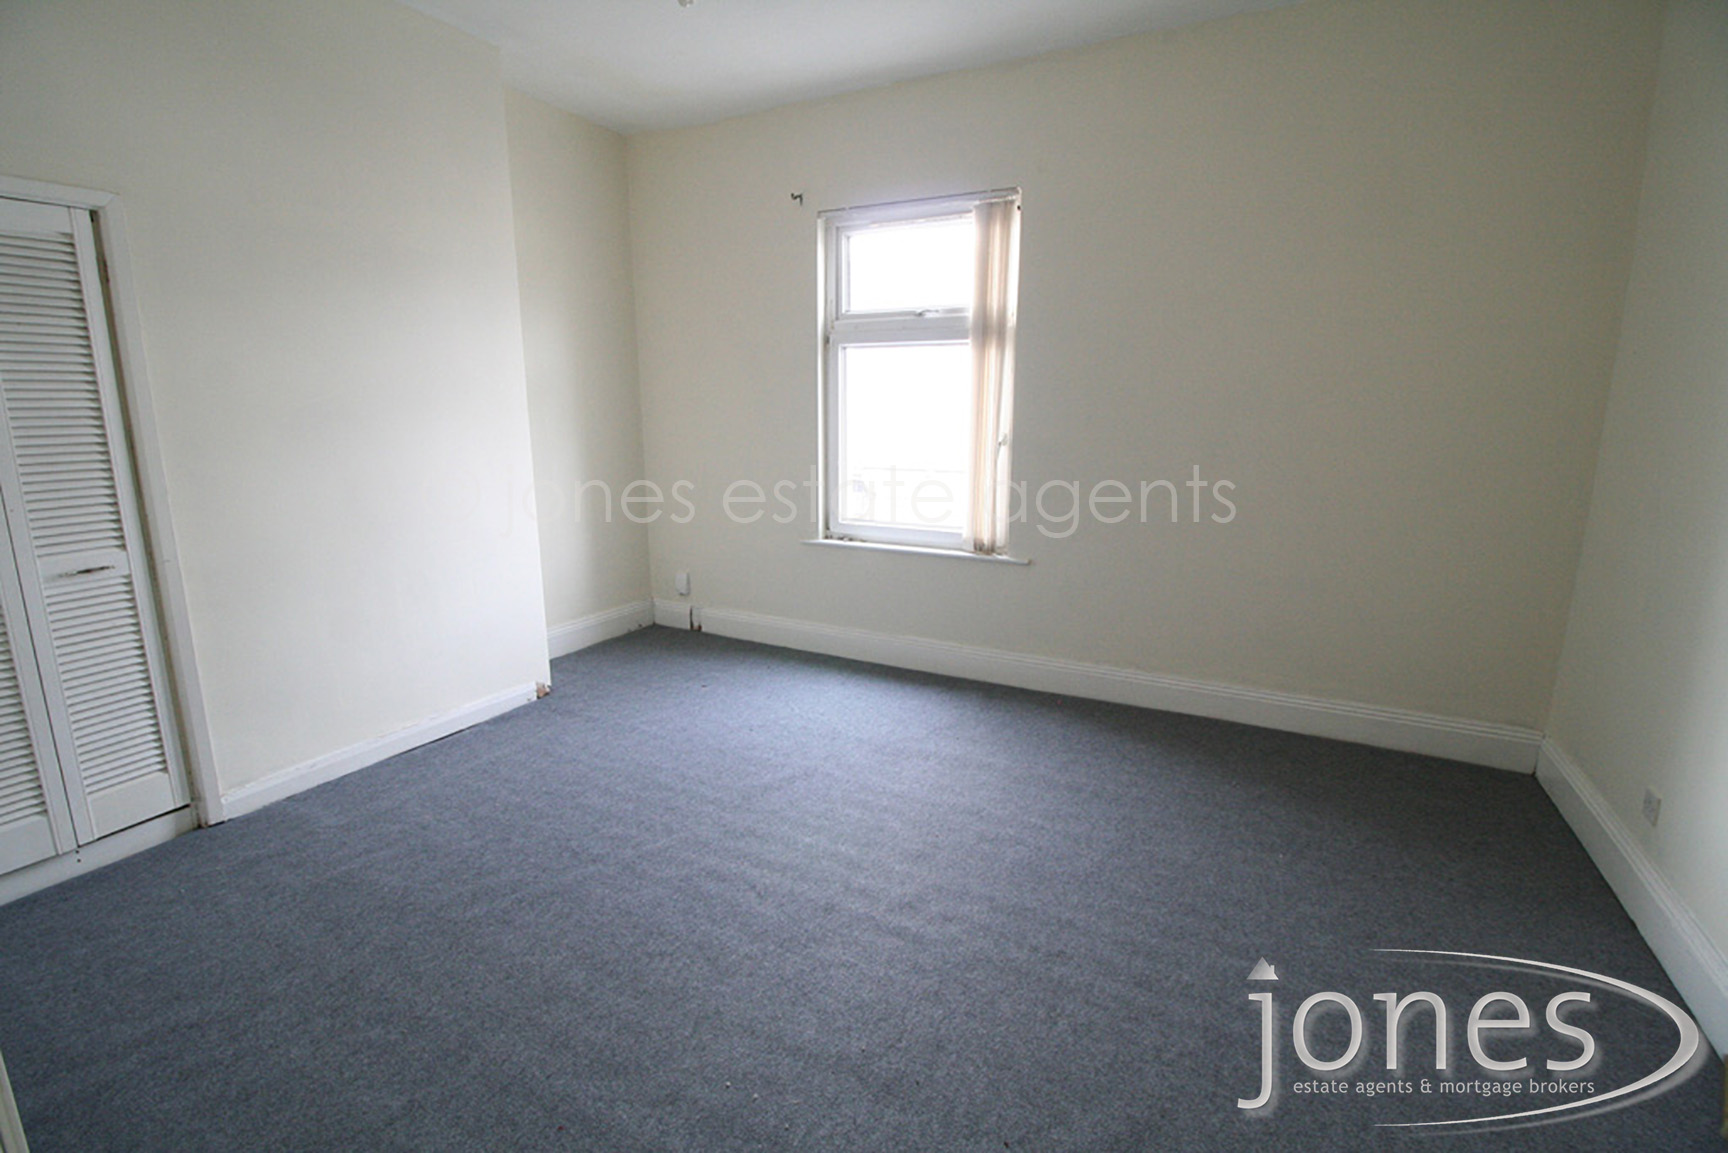 Home for Sale Let - Photo 05 St Cuthberts Road, Stockton on tees, TS18 3JW